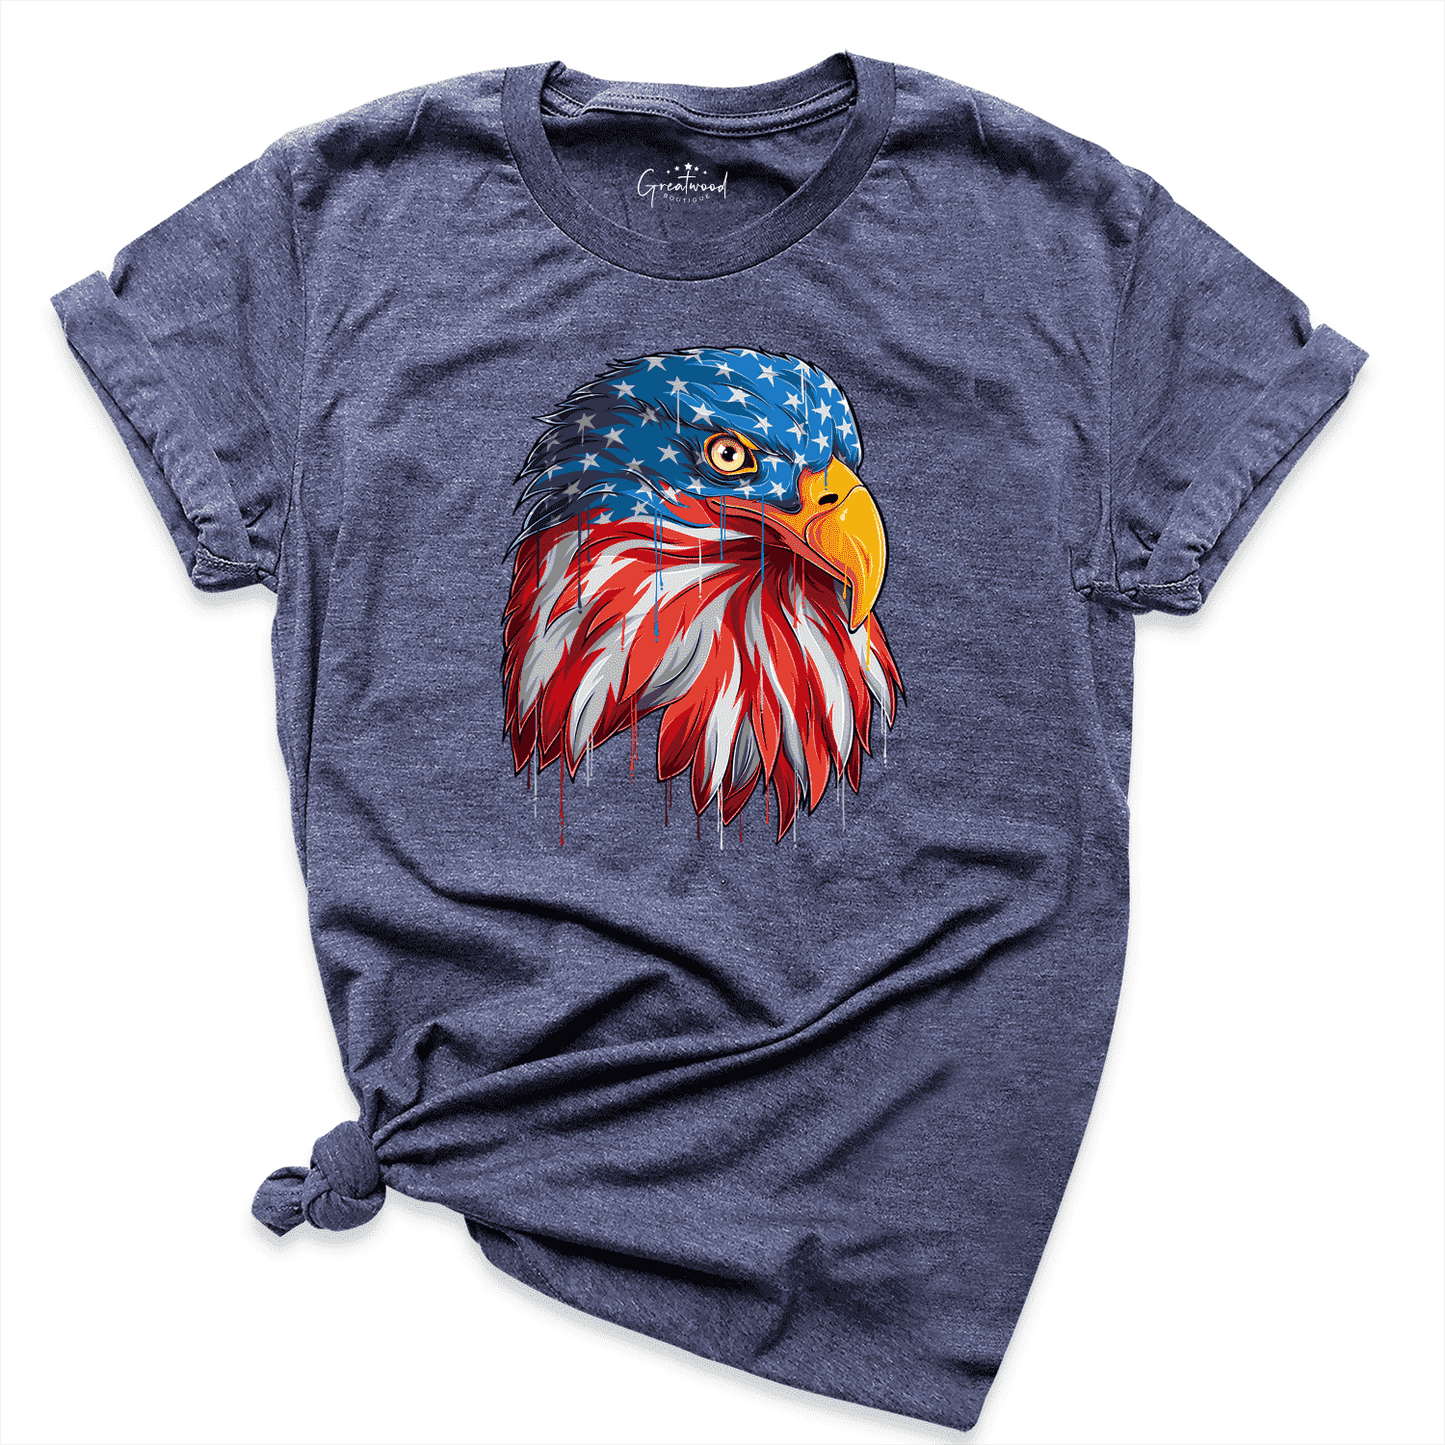 USA Eagle Shirt Navy - Greatwood Boutique